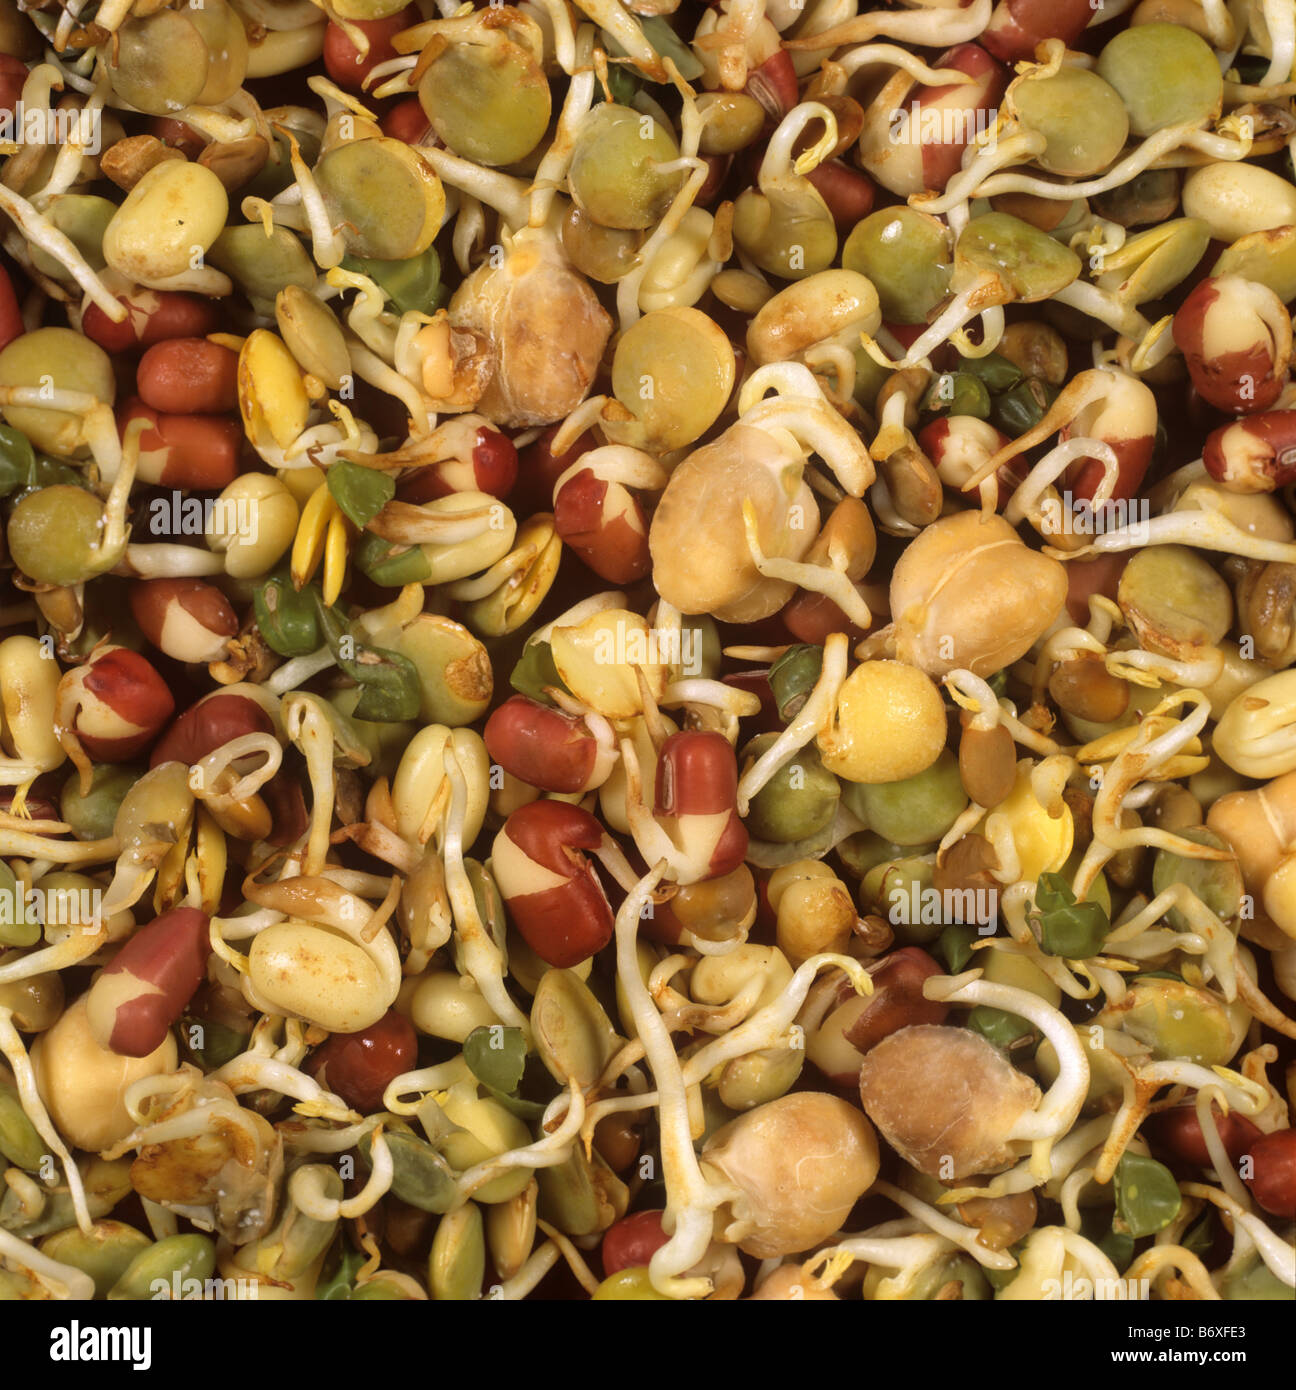 Sprouting pulse seeds chickpea lentil and adzuki beans as sold in a health food shop Stock Photo